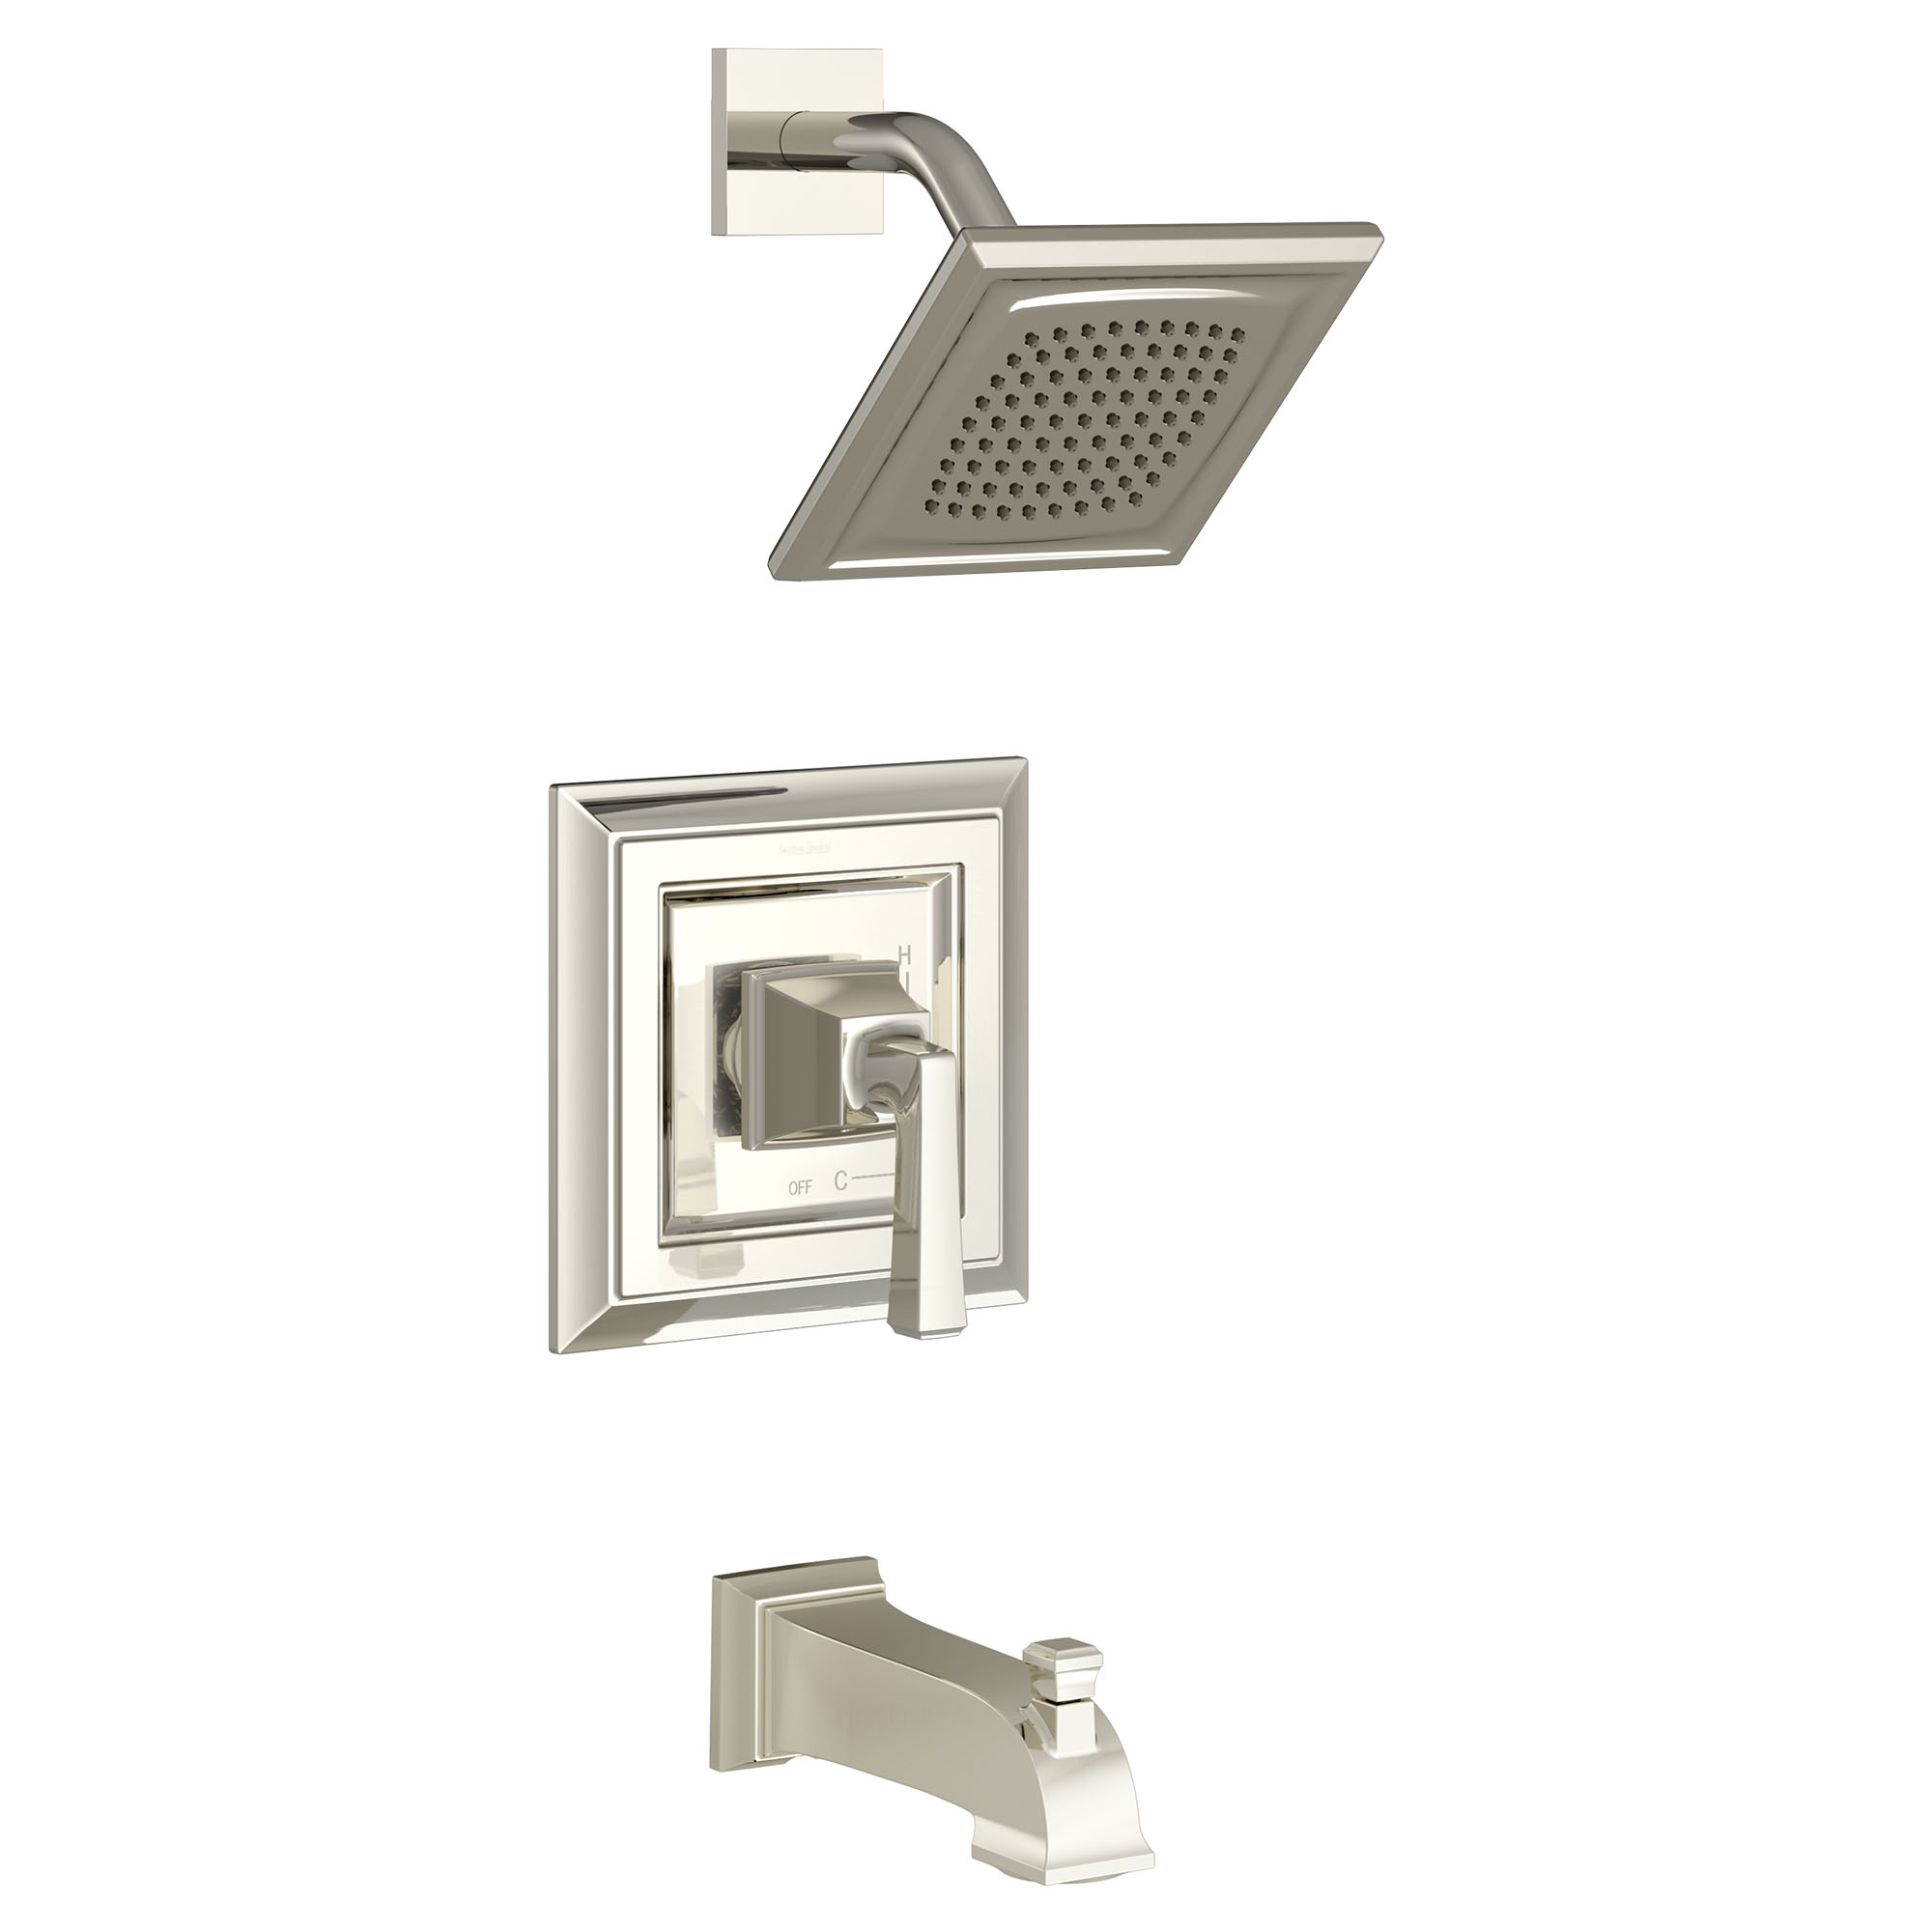 Town Square™ S 1.75 gpm/6.8 L/min Tub and Shower Trim Kit With Water-Saving Showerhead, Double Ceramic Pressure Balance Cartridge With Lever Handle